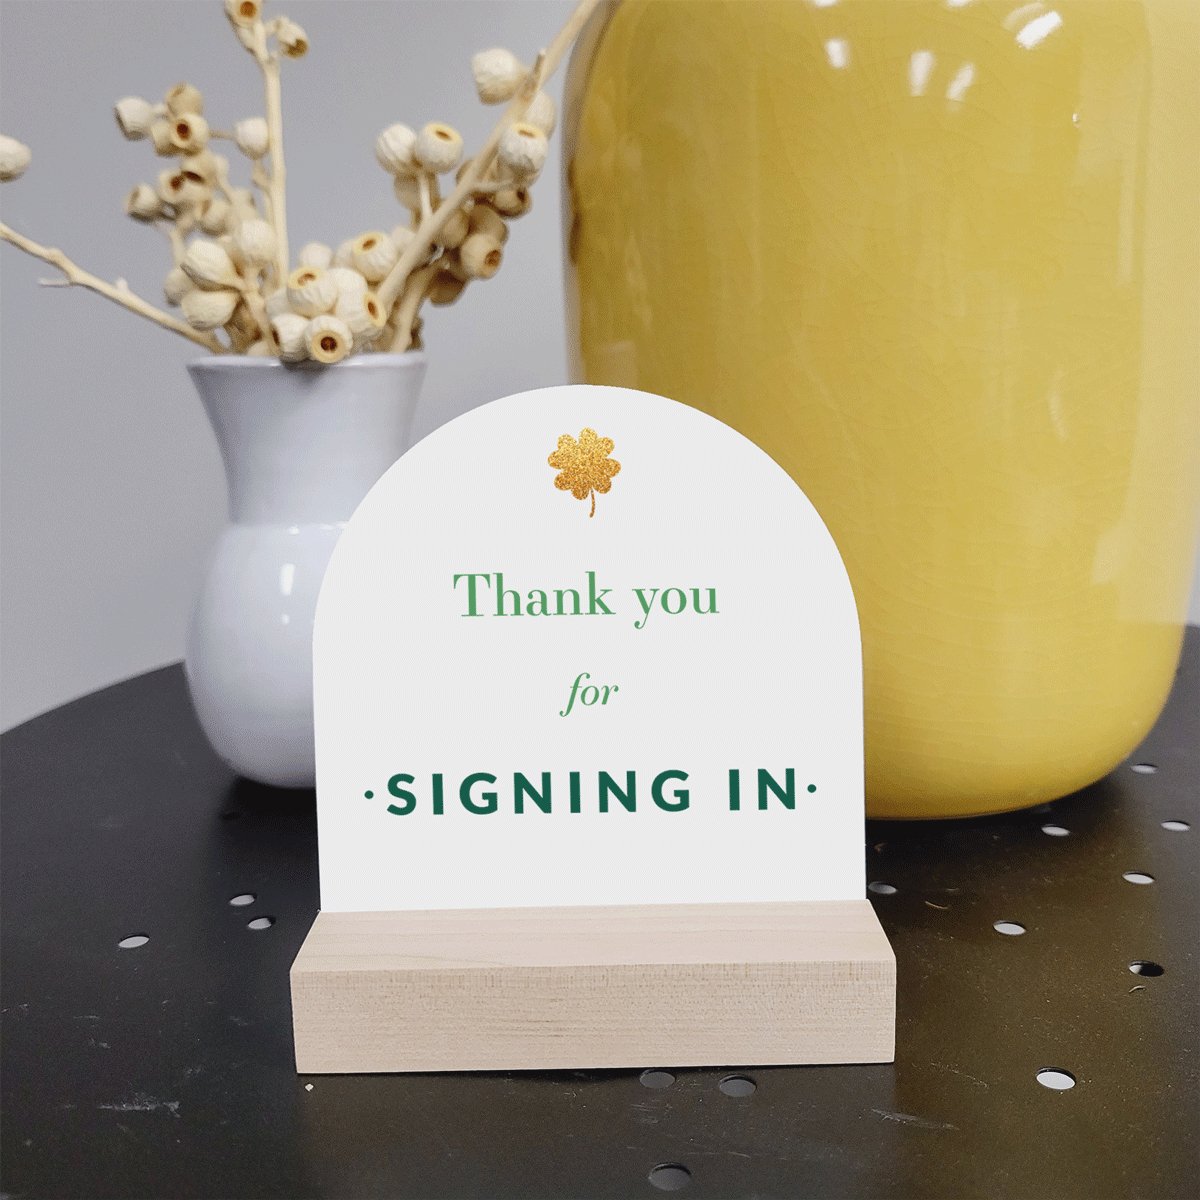 4x4 Arched Sign - Thank You For Signing In - St. Patricks - All Things Real Estate